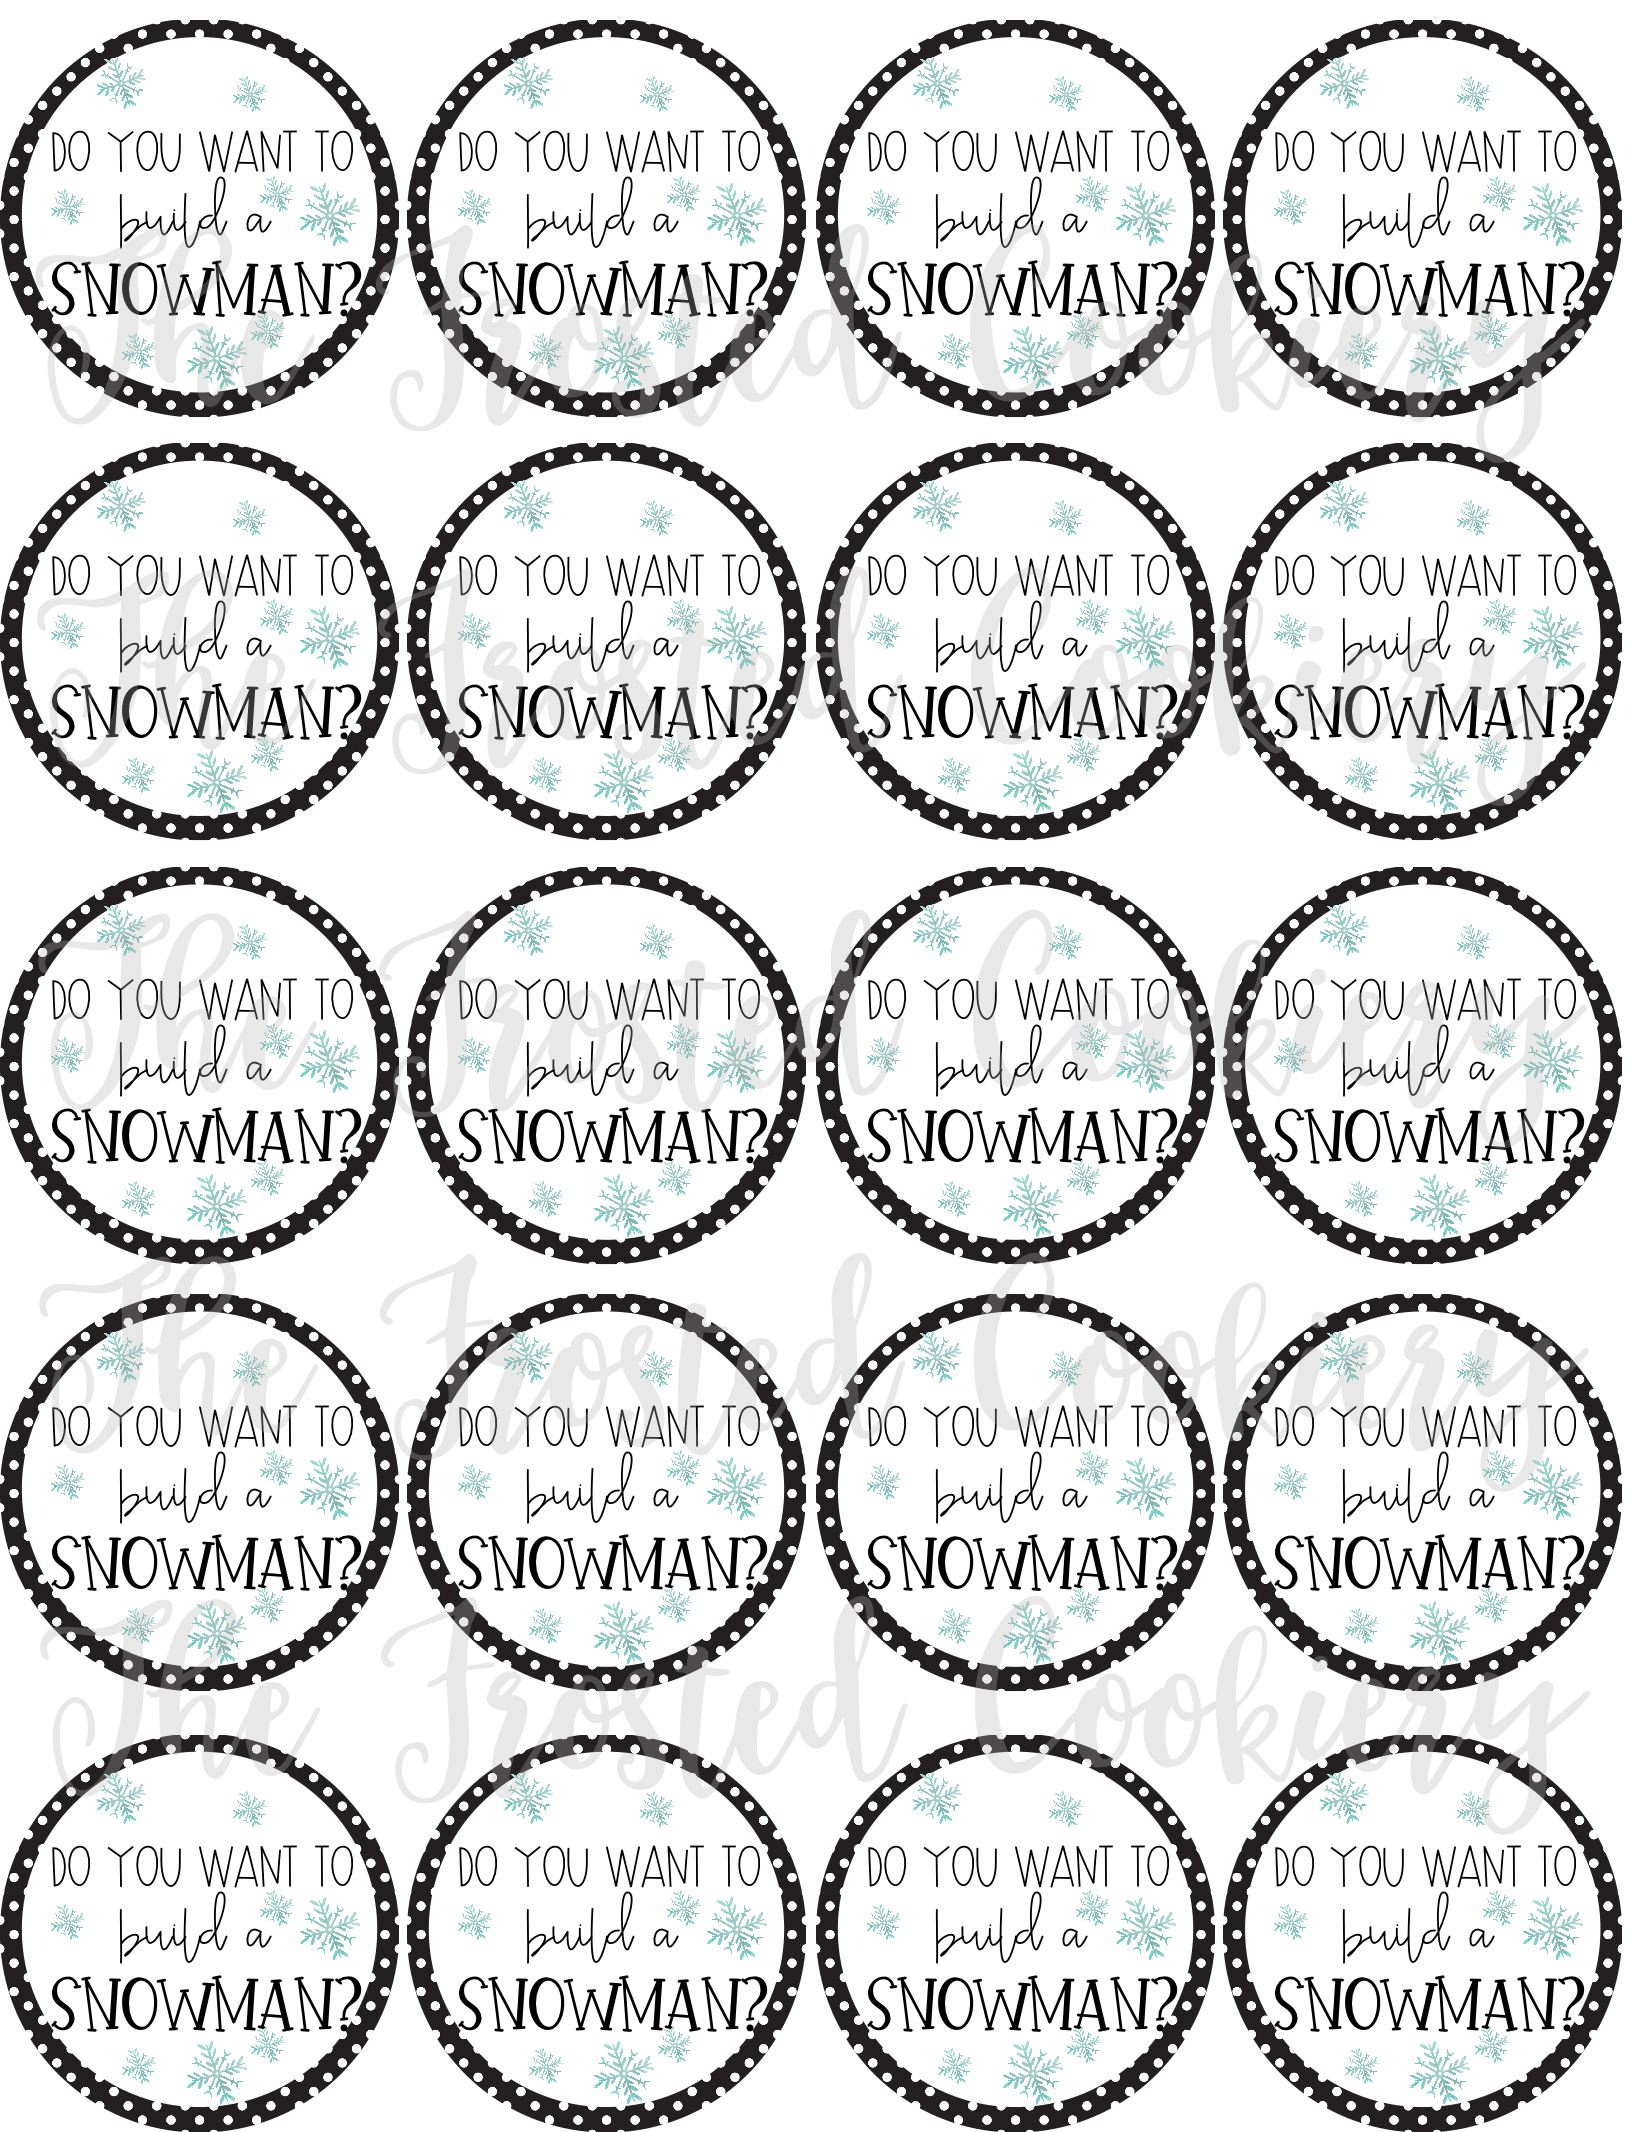 Do You Want to Build a Snowman? Circle Tags